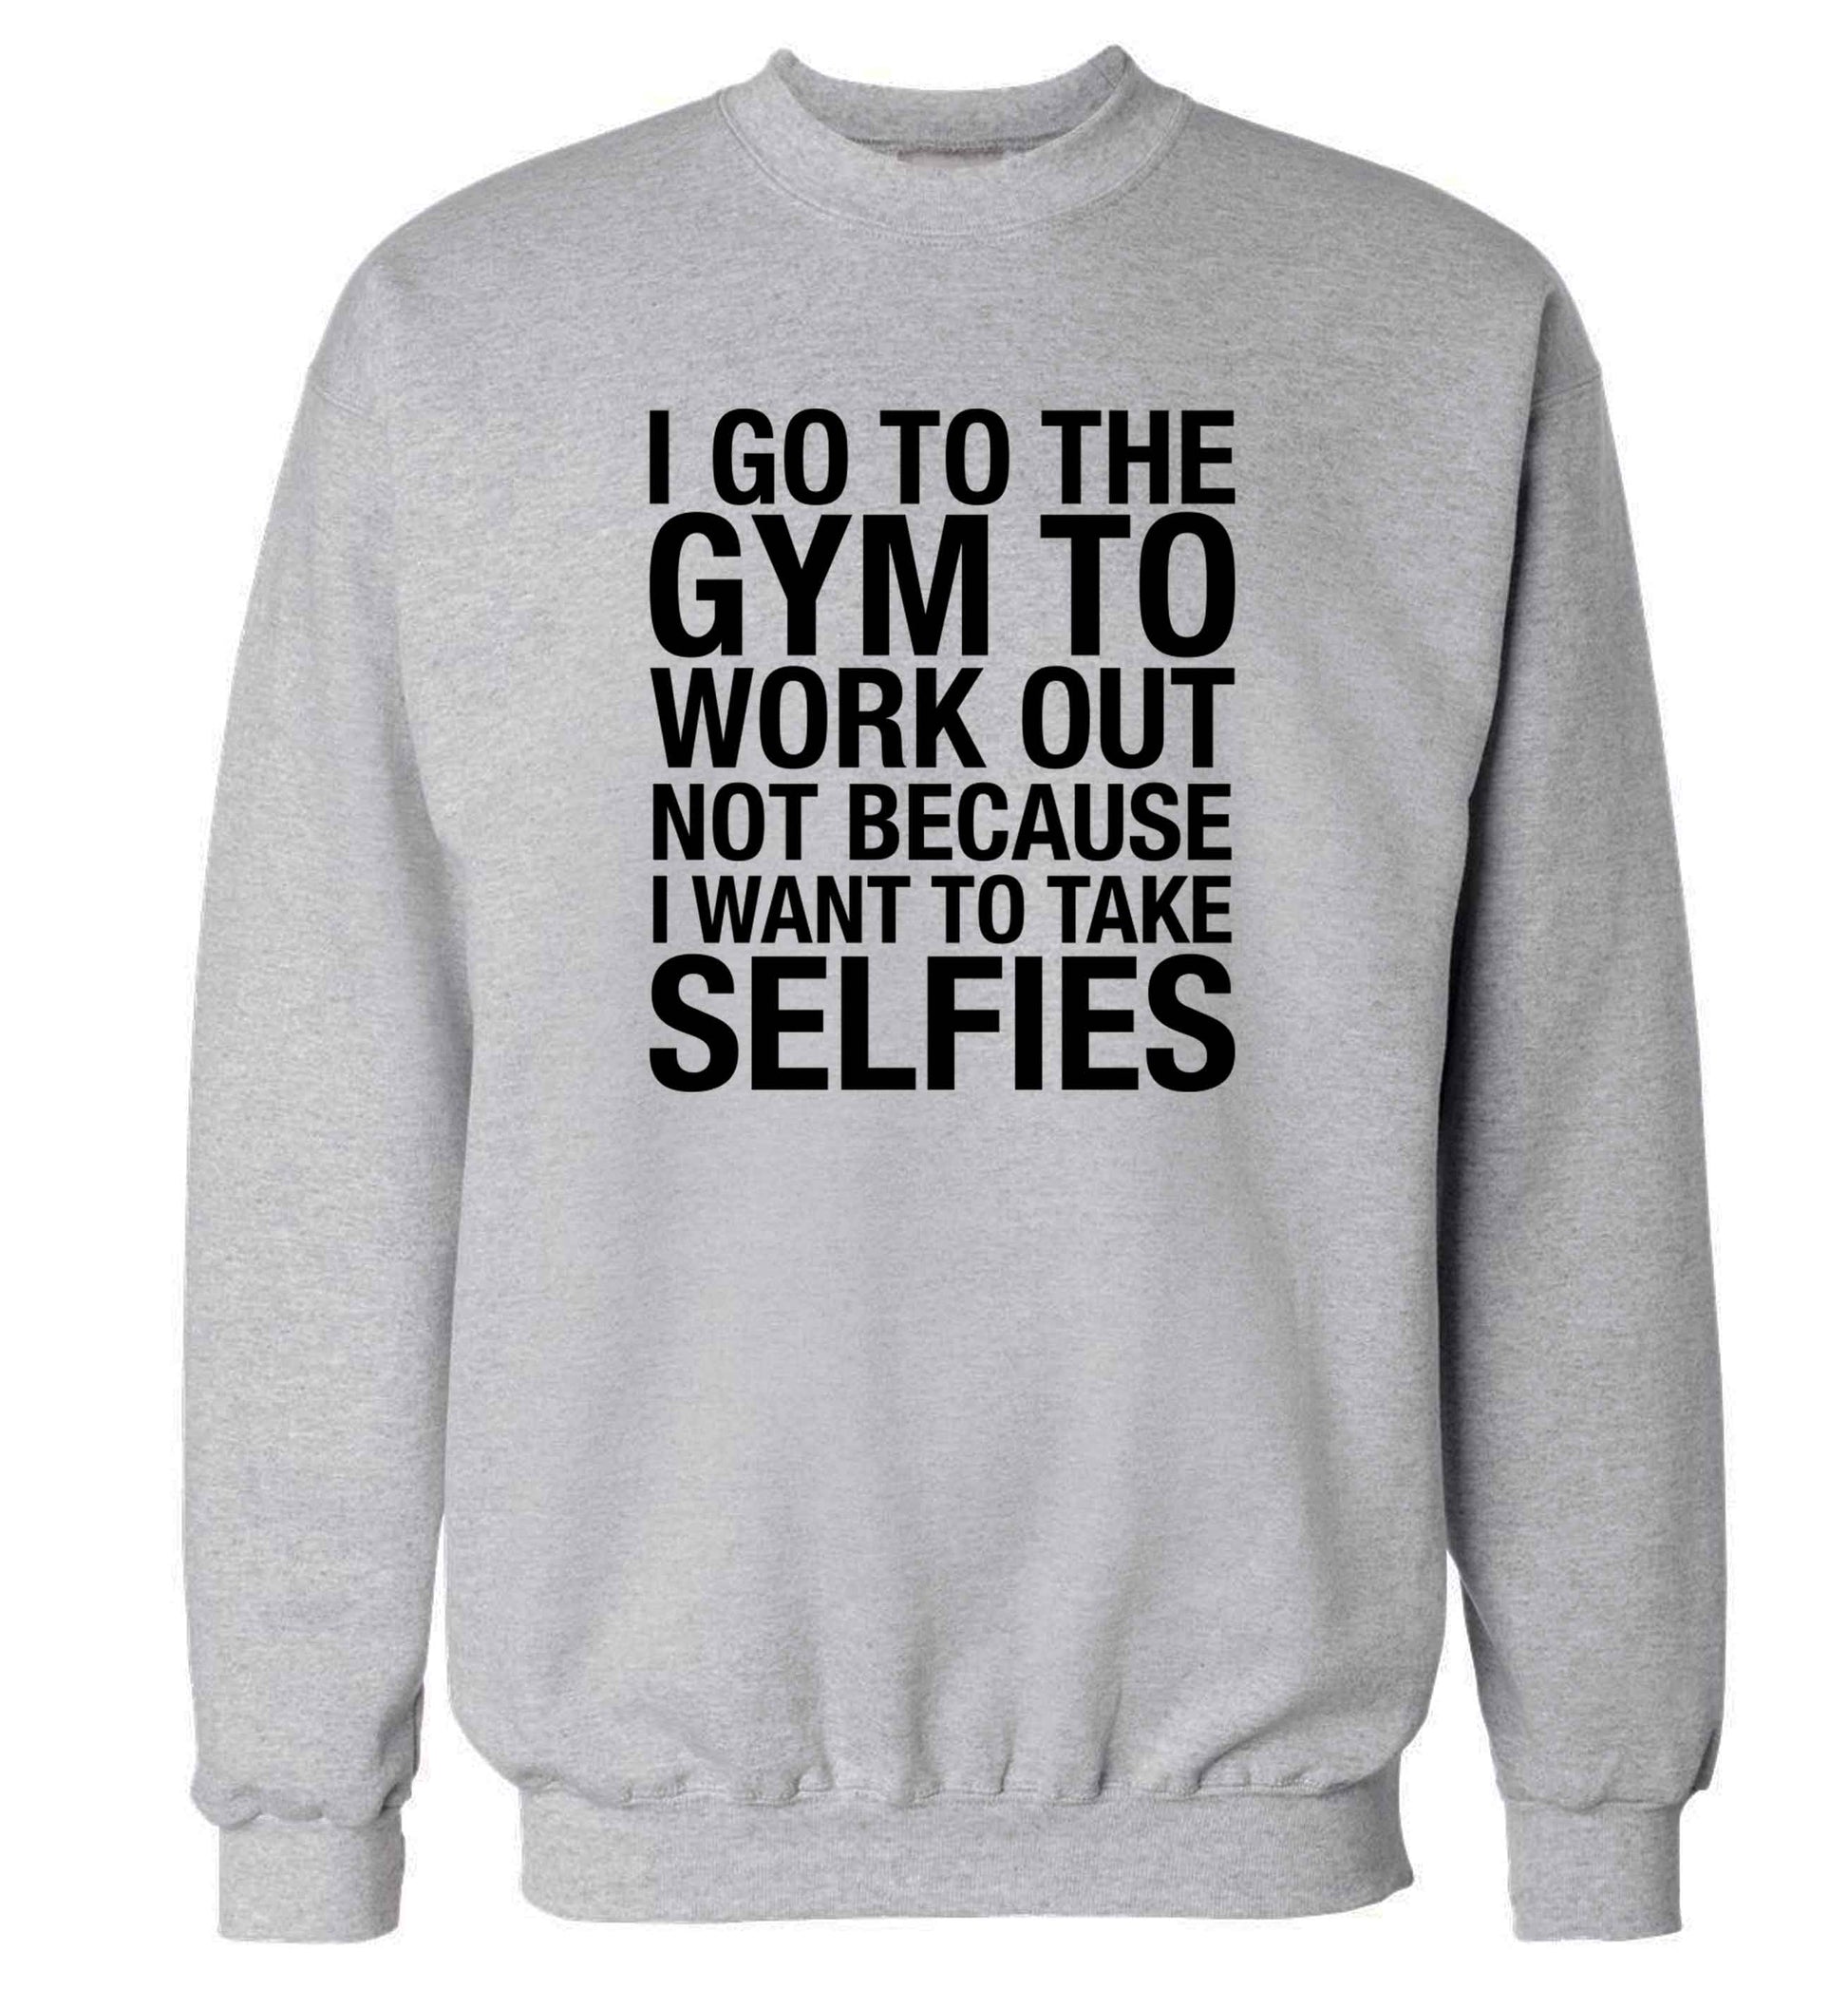 I go to the gym to workout not to take selfies adult's unisex grey sweater 2XL